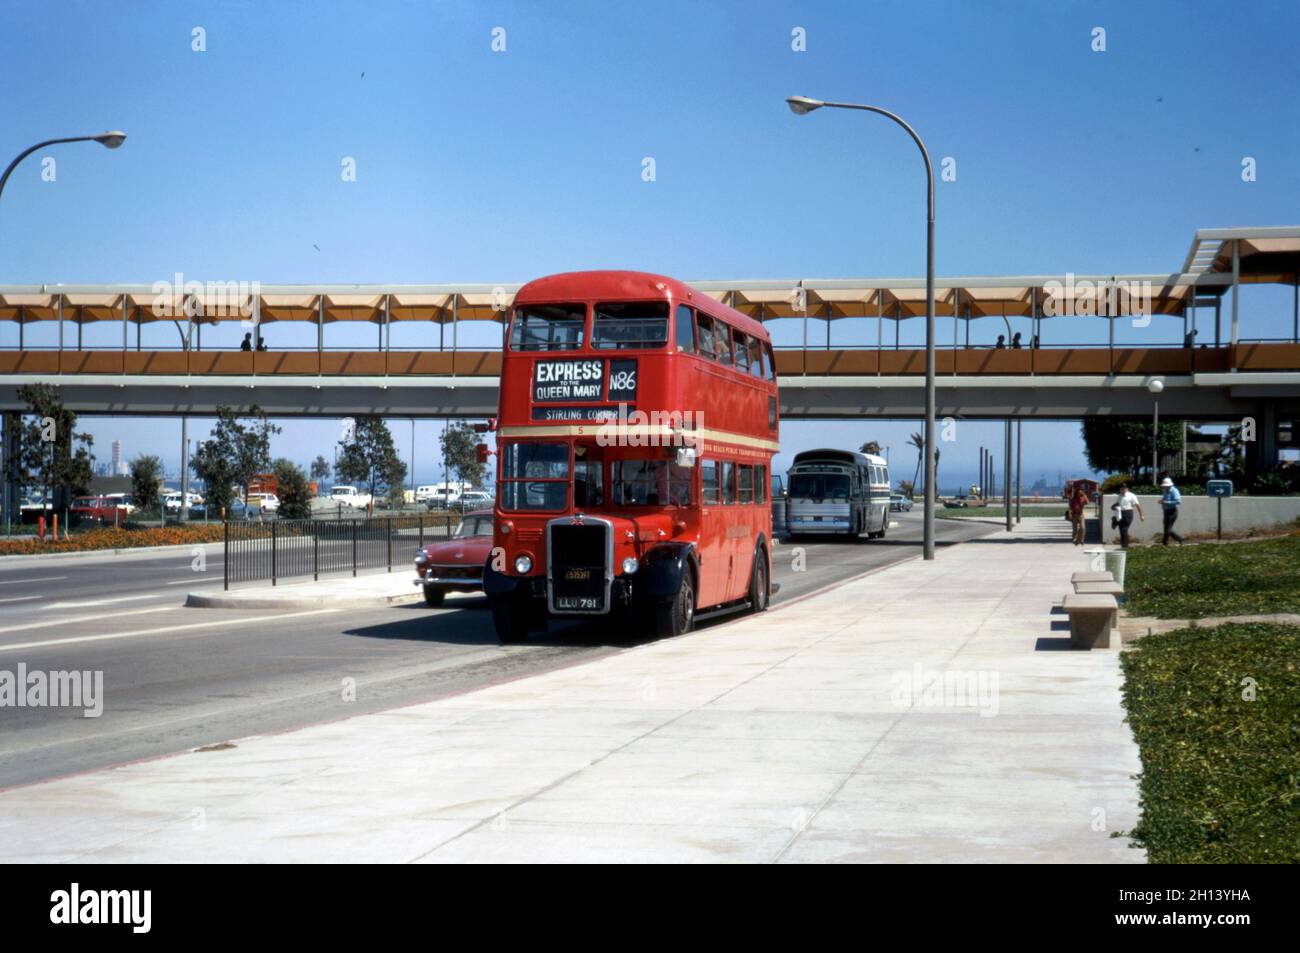 A traditional, London double-decker bus in Long Beach, California, USA in 1972. The bus was part of a small fleet (this bus is number 5) purchased by the Long Beach Public Transport Company to provide a service from downtown to Pierpoint Landing where RMS Queen Mary was moored. The ship, permanently moored at the port, is a tourist attraction featuring restaurants, a museum and a hotel. The red bus LLU 791 is an Leyland RTL model (RTL1037) dating from 1950. This image is from an old American amateur Kodak colour transparency – a vintage 1970s photograph. Stock Photo